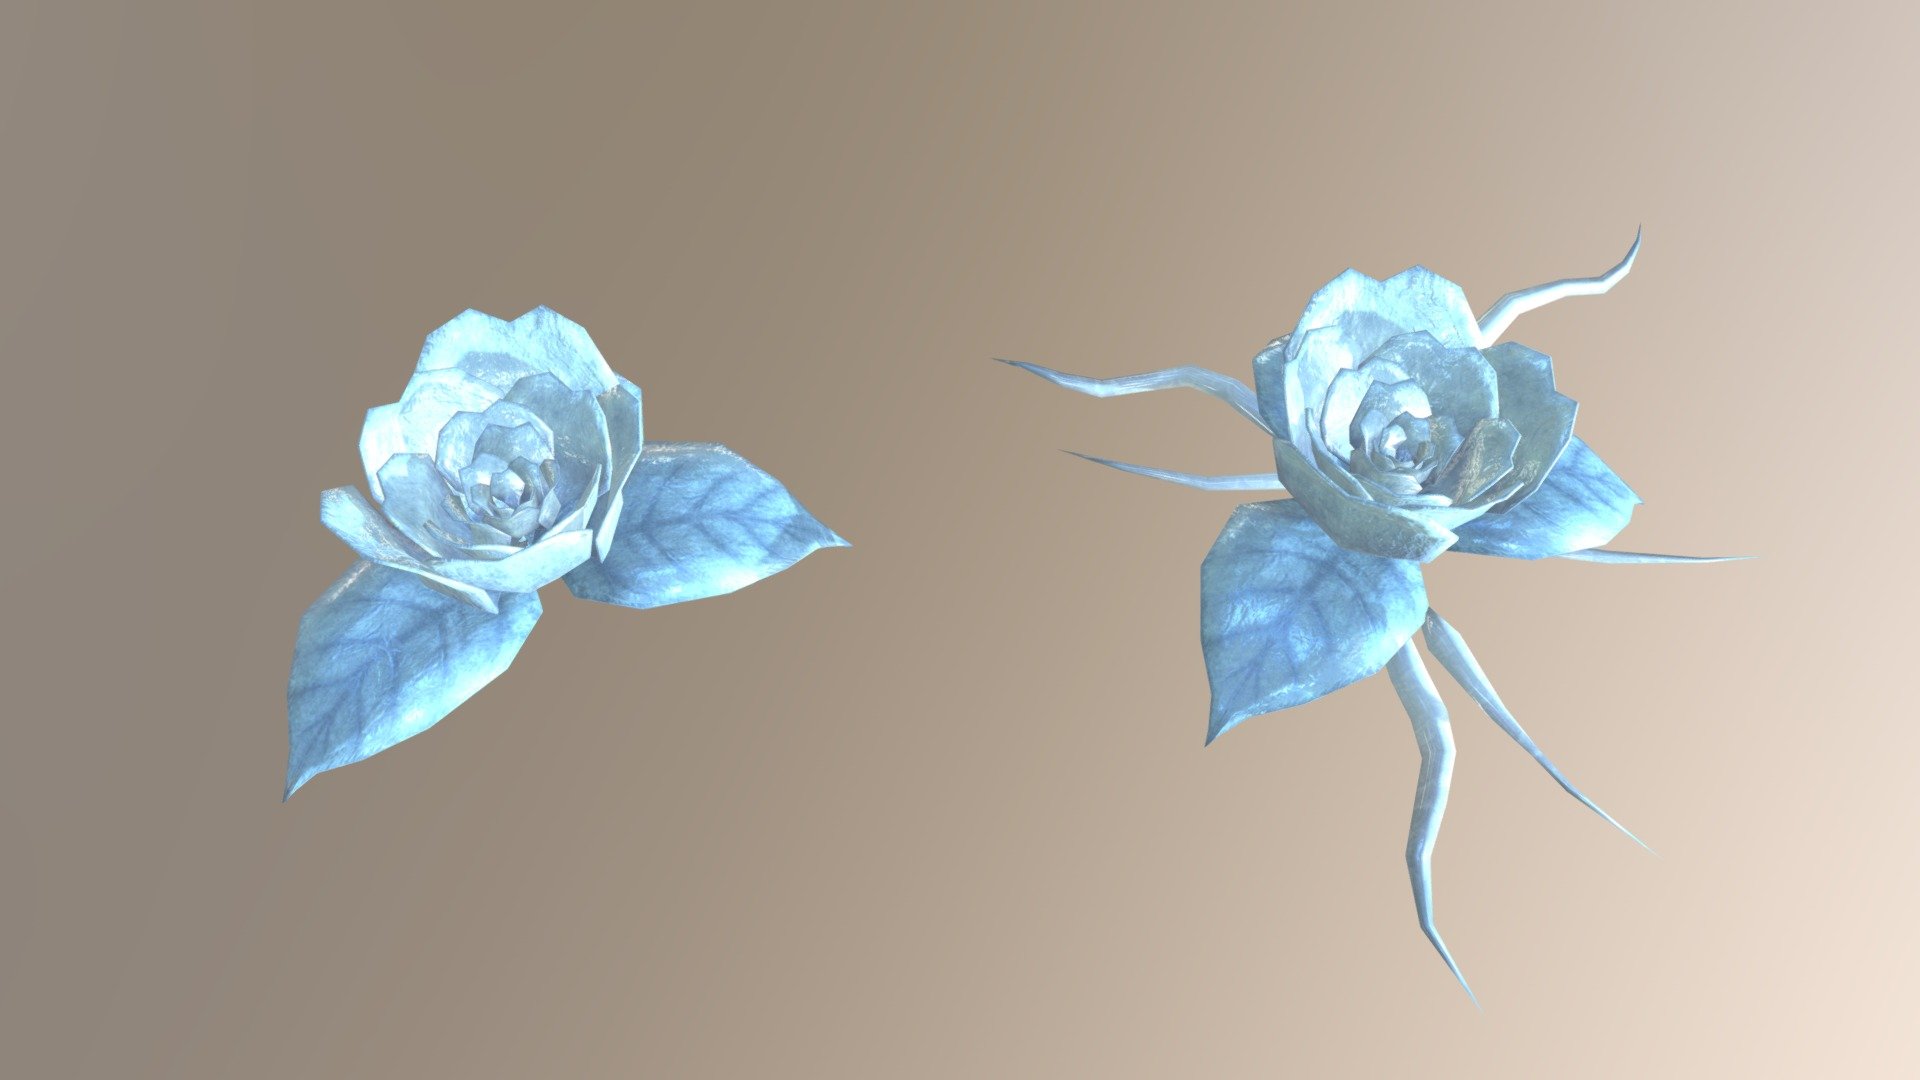 Vrchat想定 青い薔薇モデル しぐにゃもbooth Booth